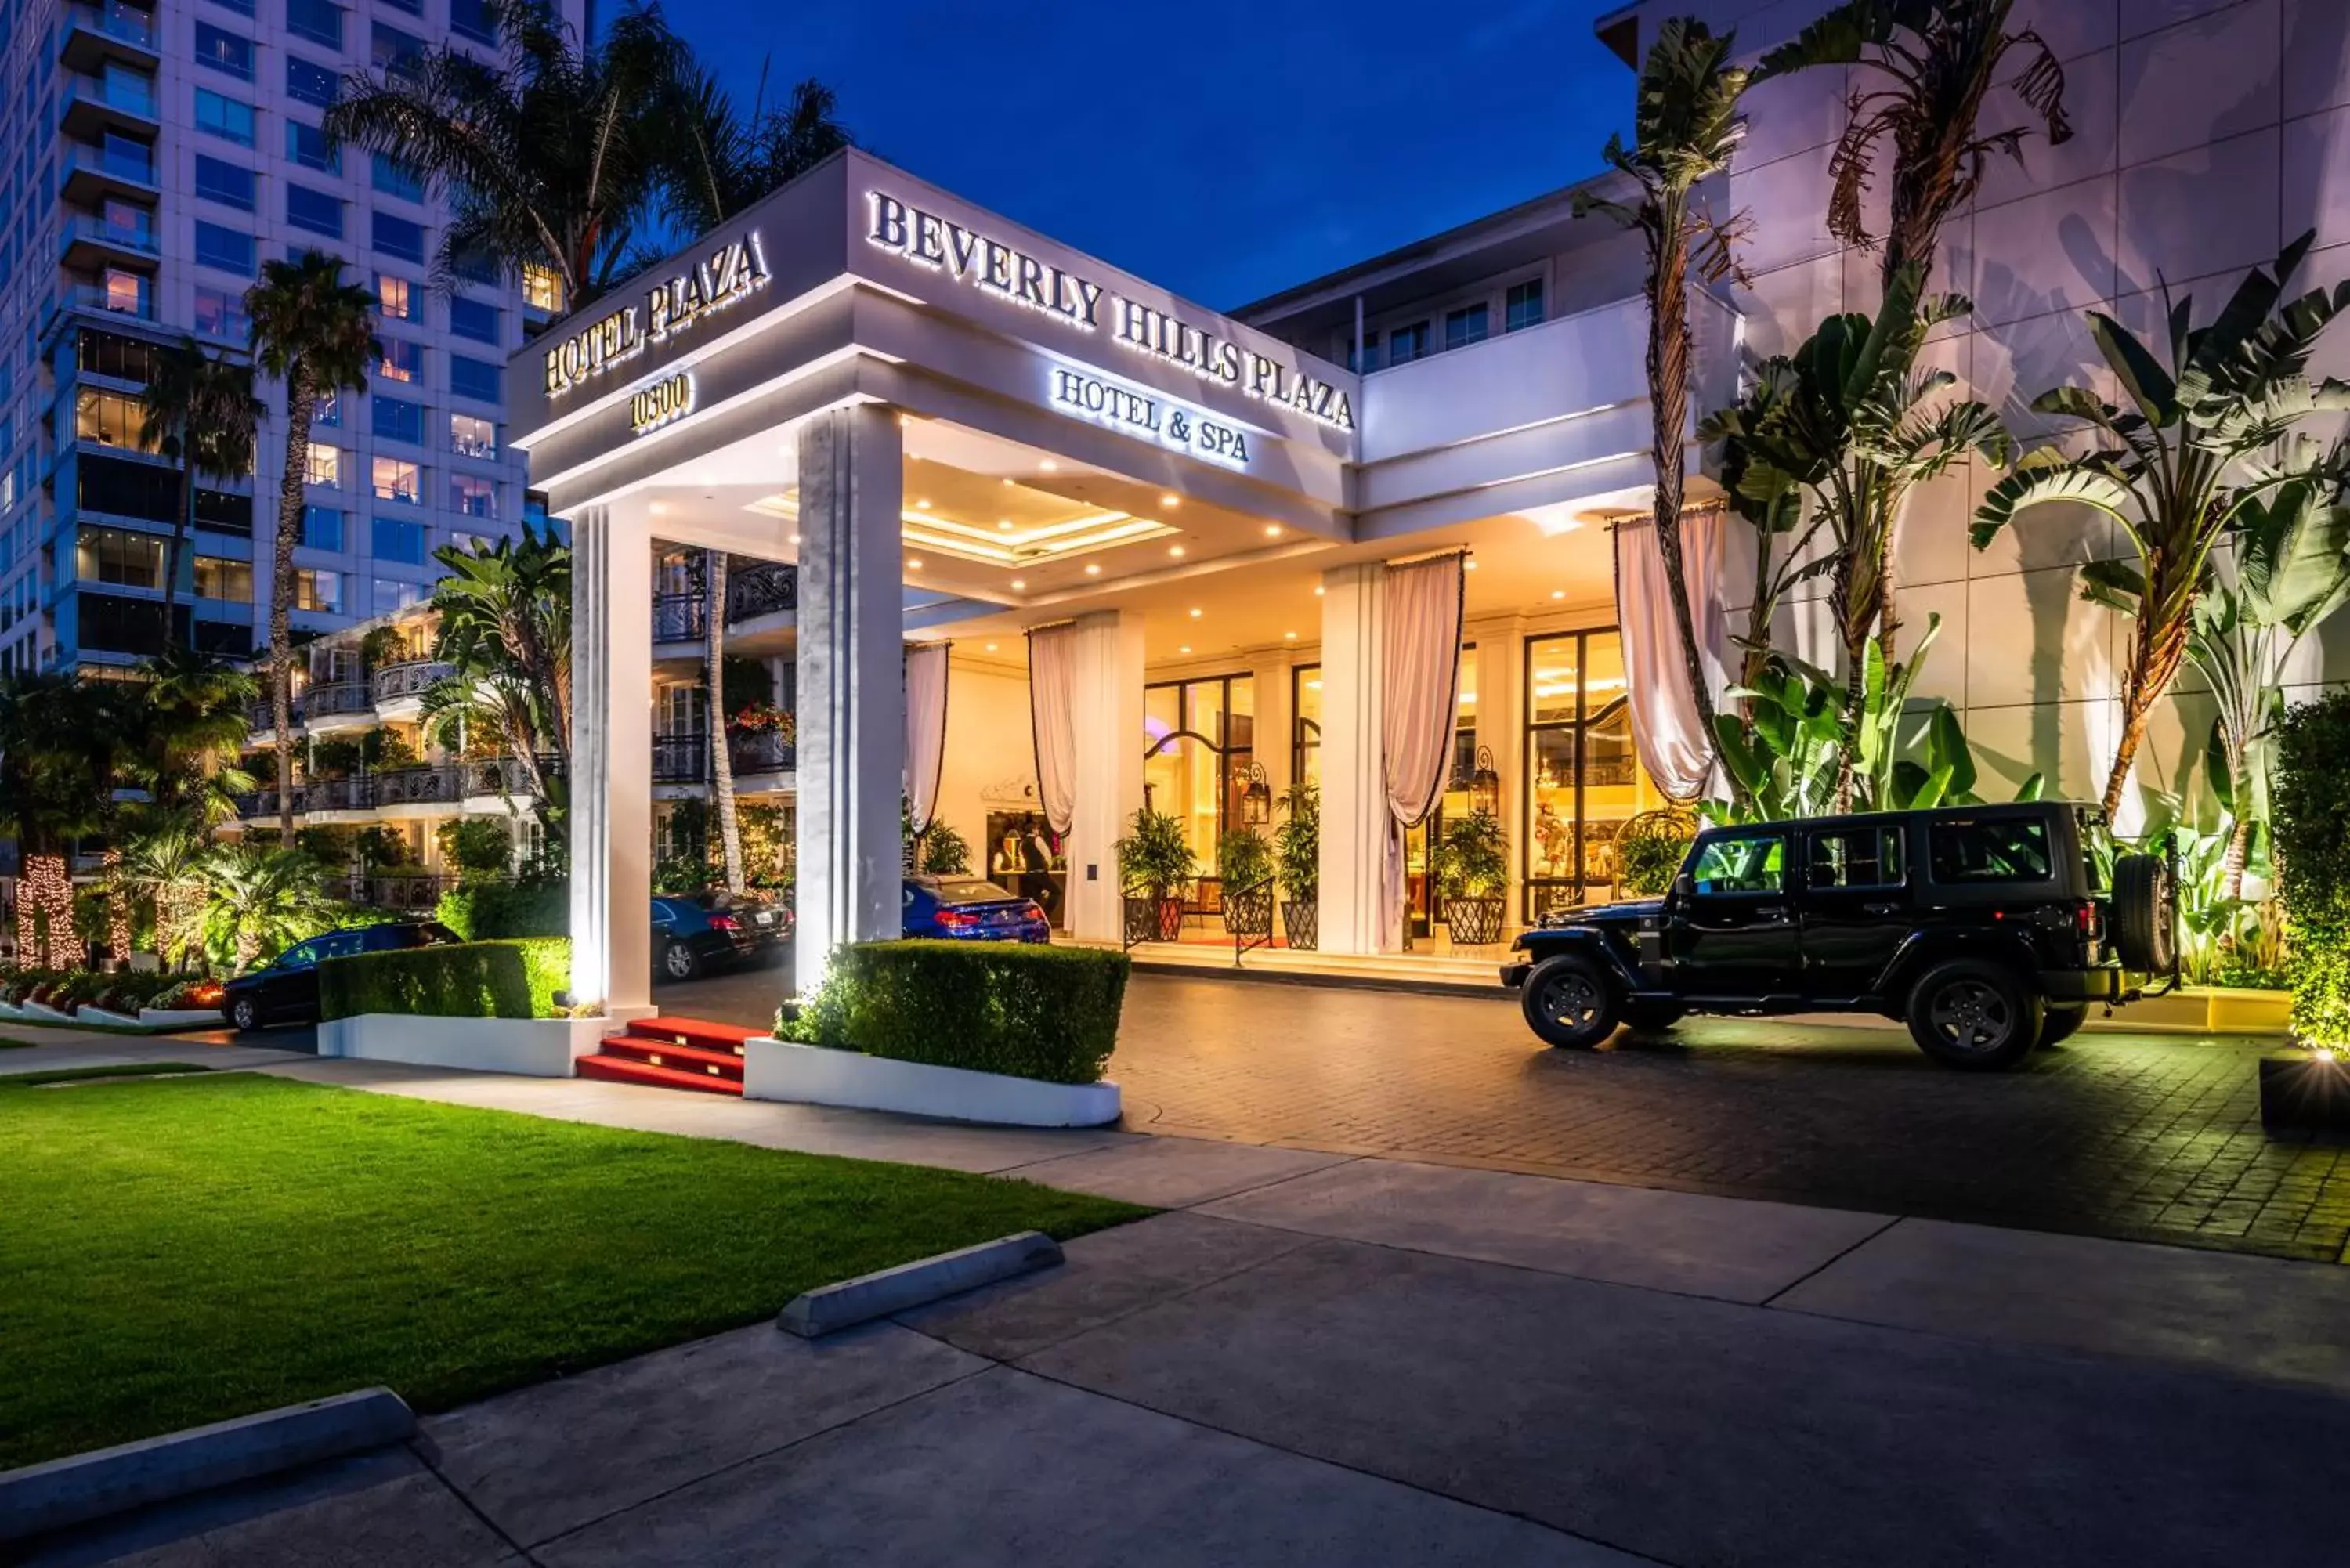 Facade/entrance in Beverly Hills Plaza Hotel & Spa